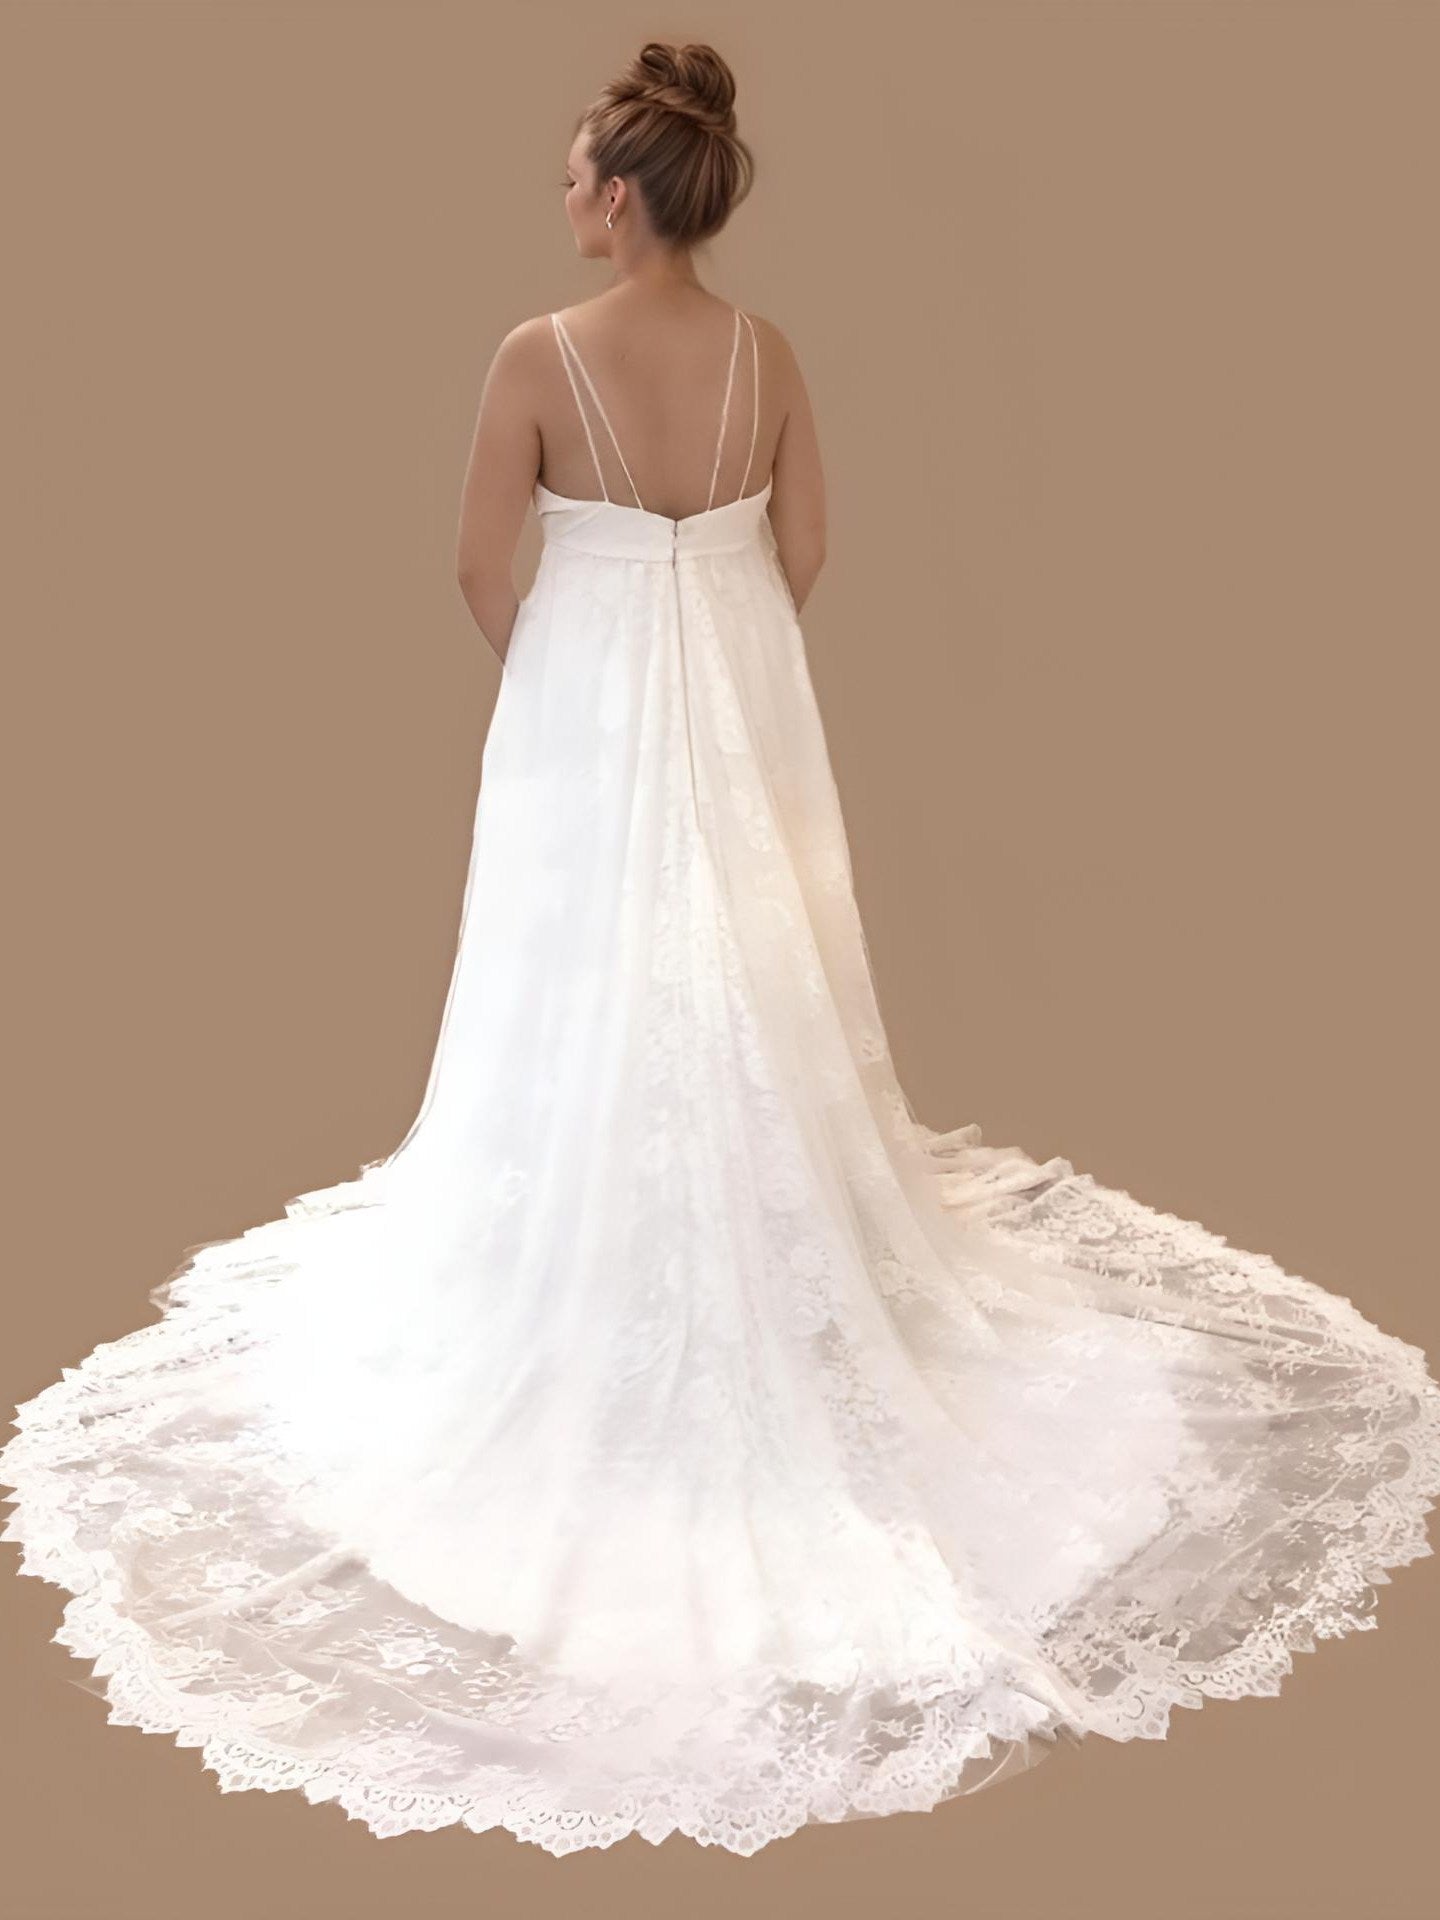 Back View of Expectant Mother in Romantic Lace Maternity Wedding Gown with Lace Train